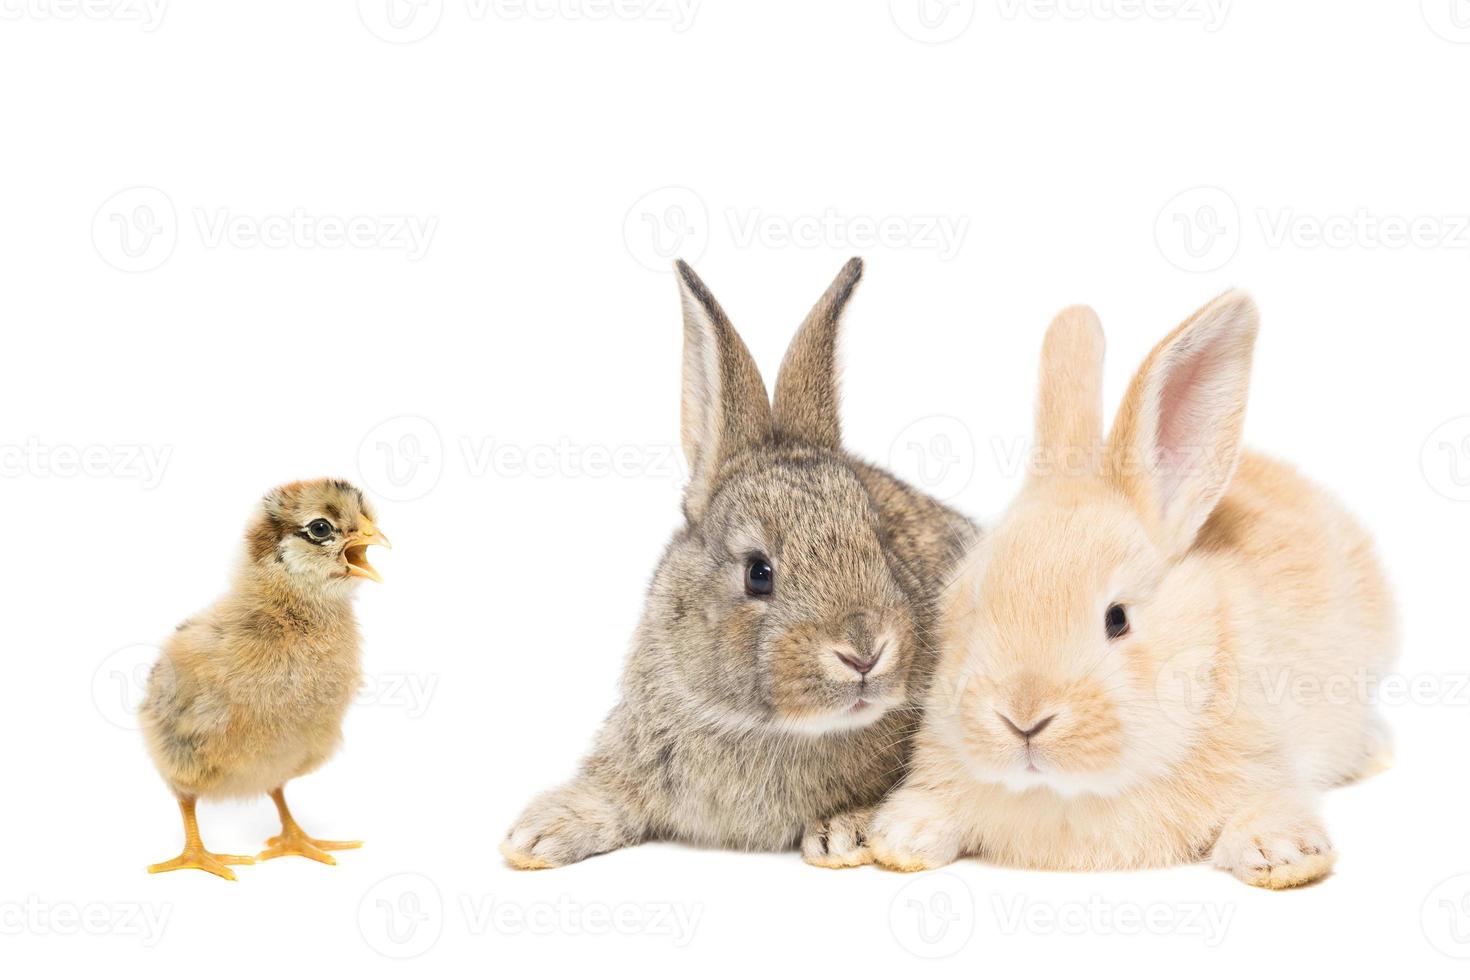 Bunny and chicken photo